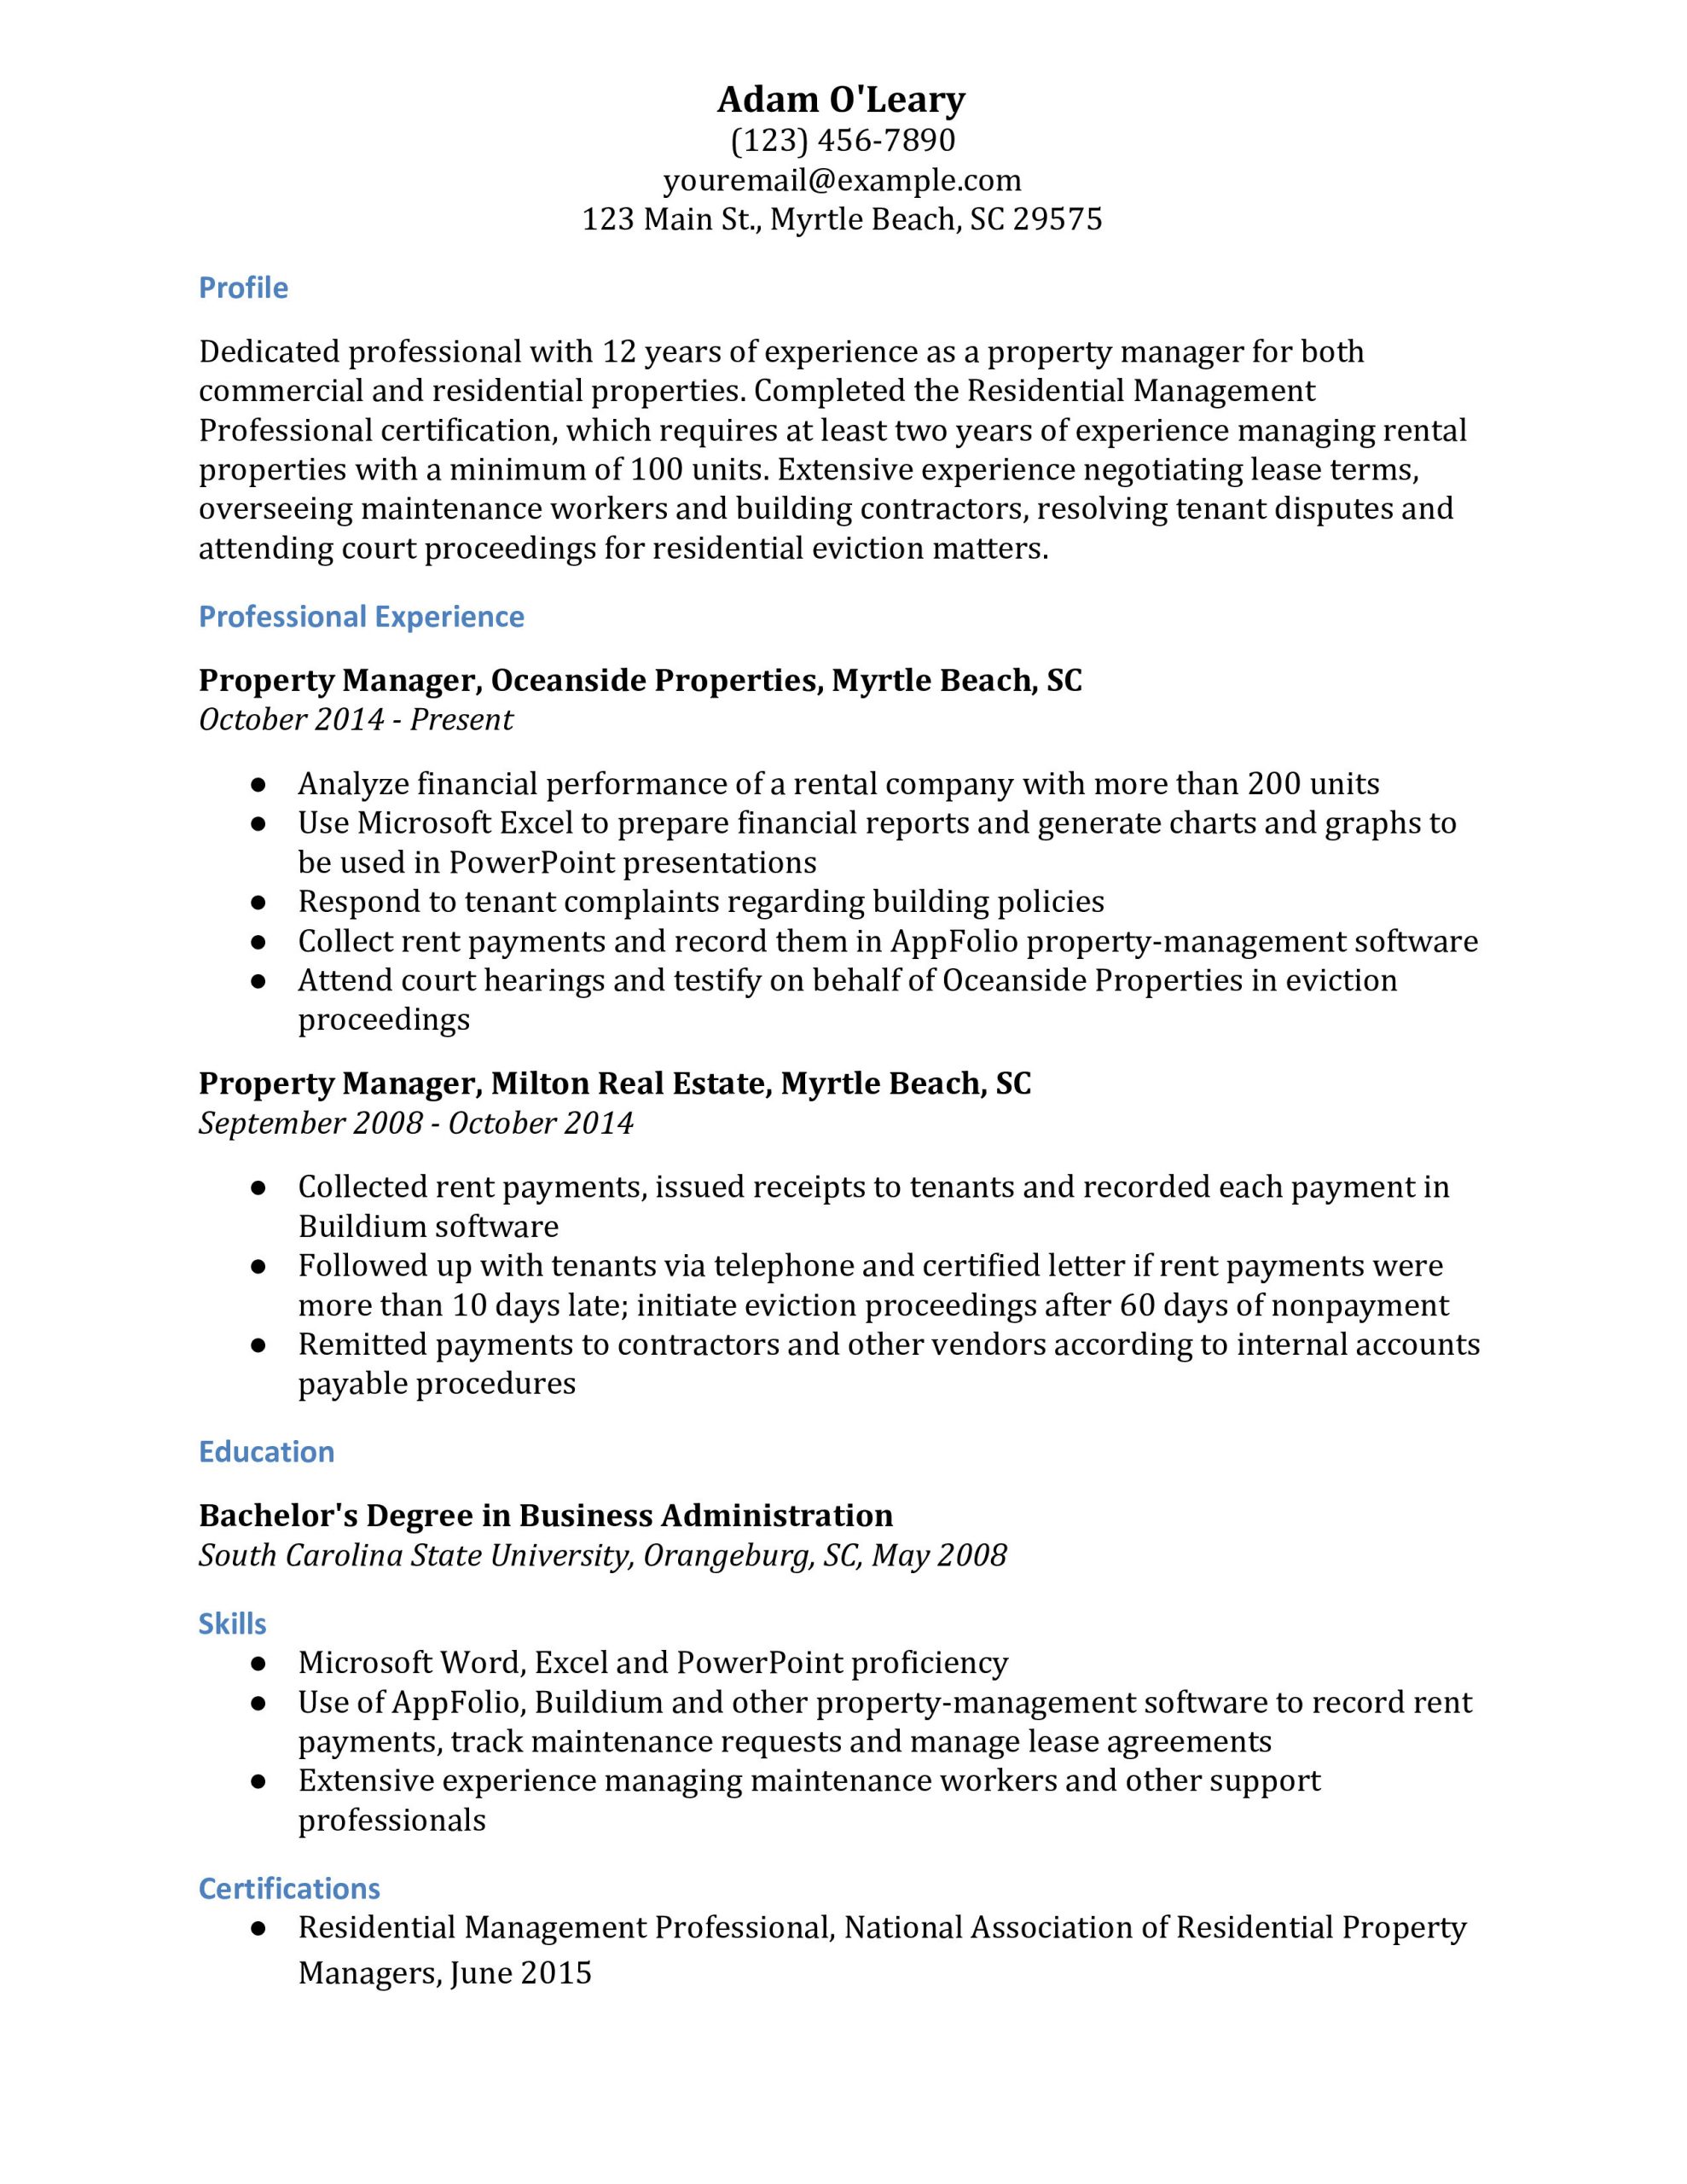 Sample Resume for Residential Property Manager Property Manager Resume Examples – Resumebuilder.com